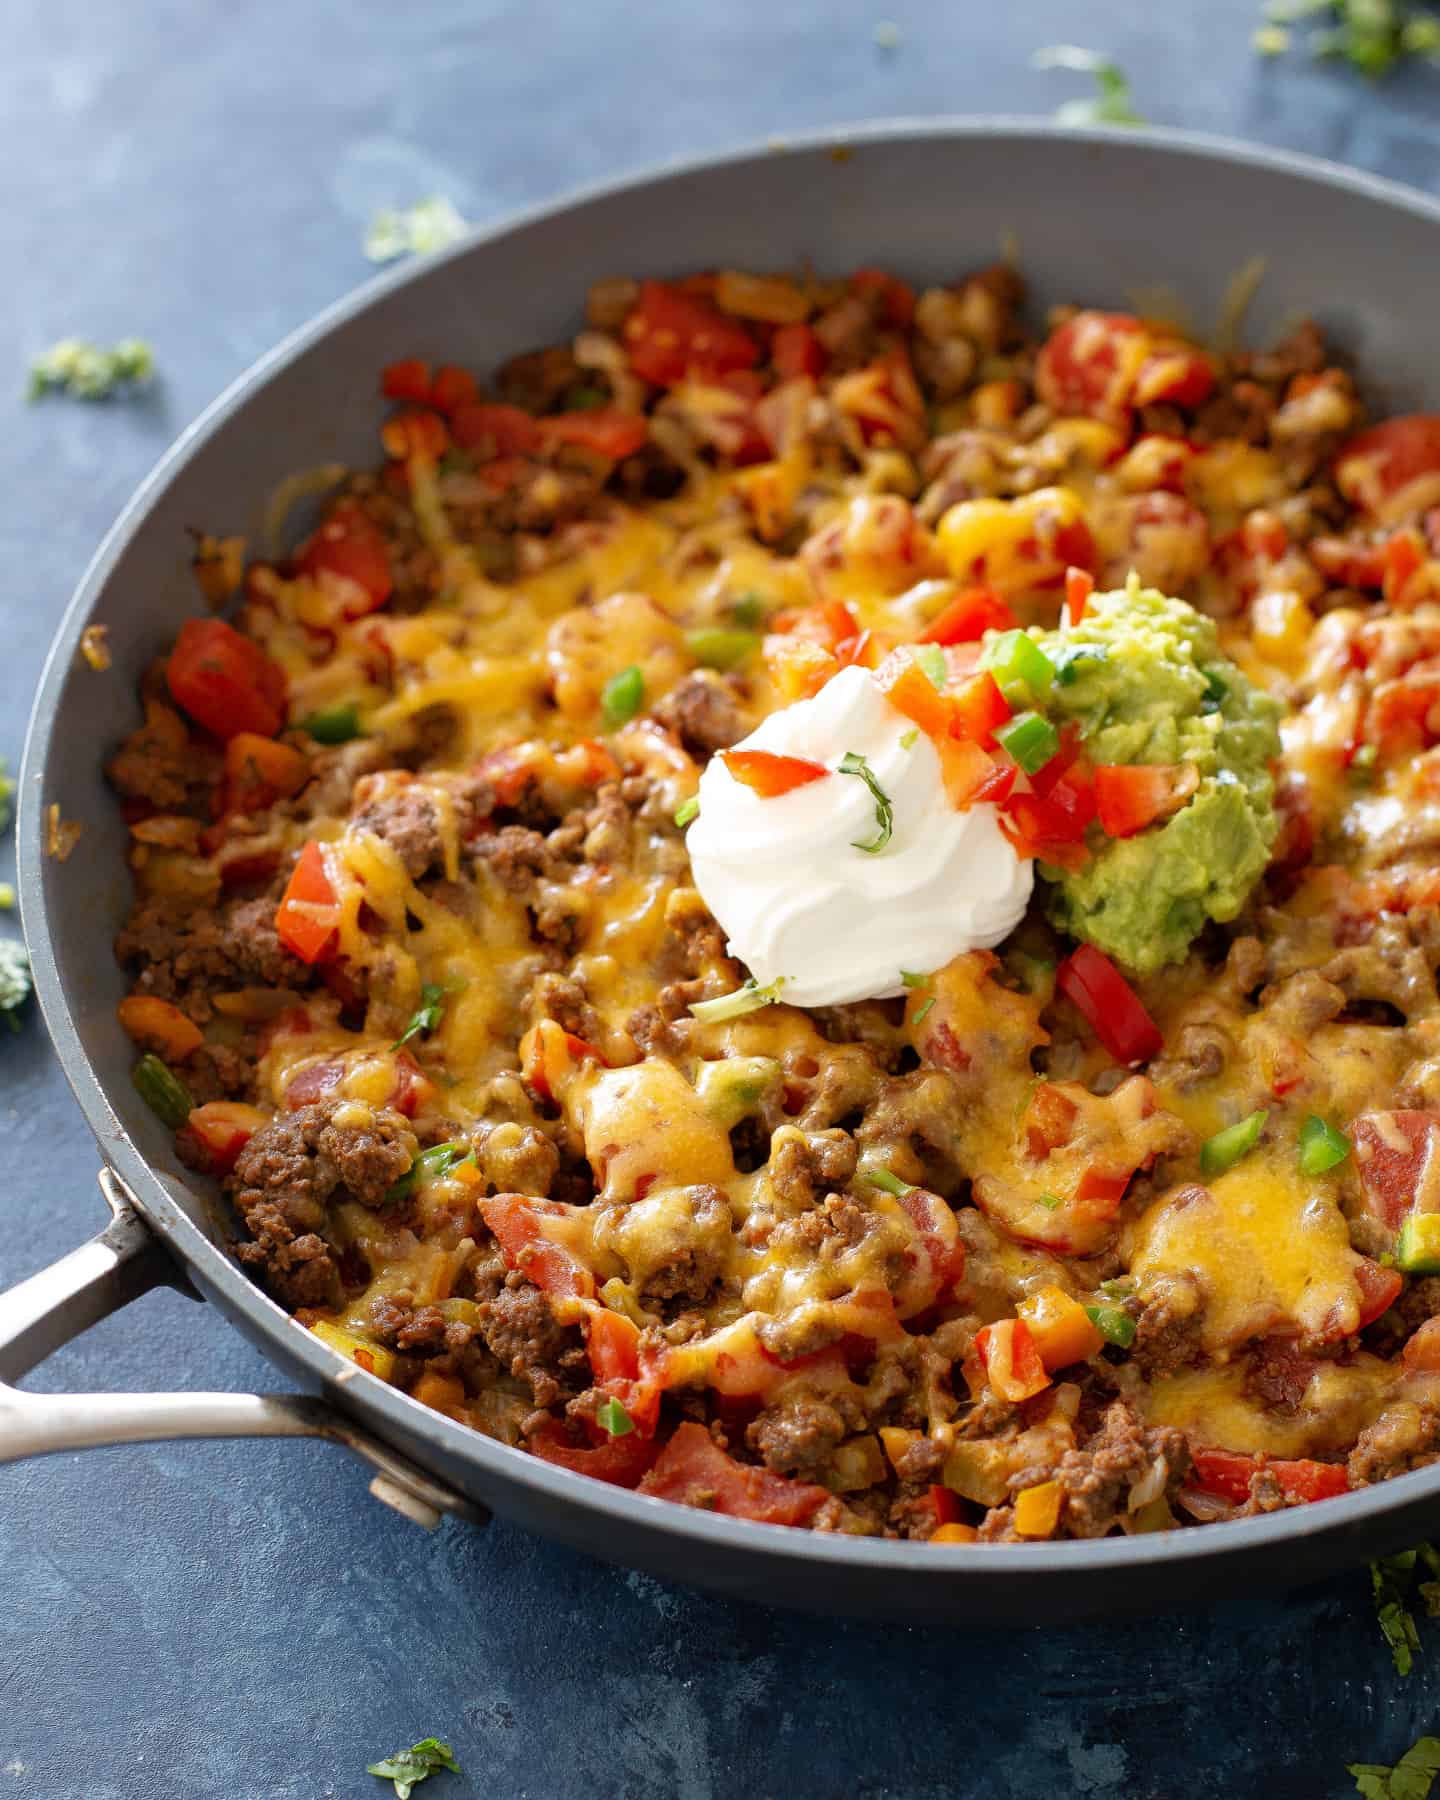 https://www.the-girl-who-ate-everything.com/wp-content/uploads/2022/01/low-carb-taco-skillet-11.jpg